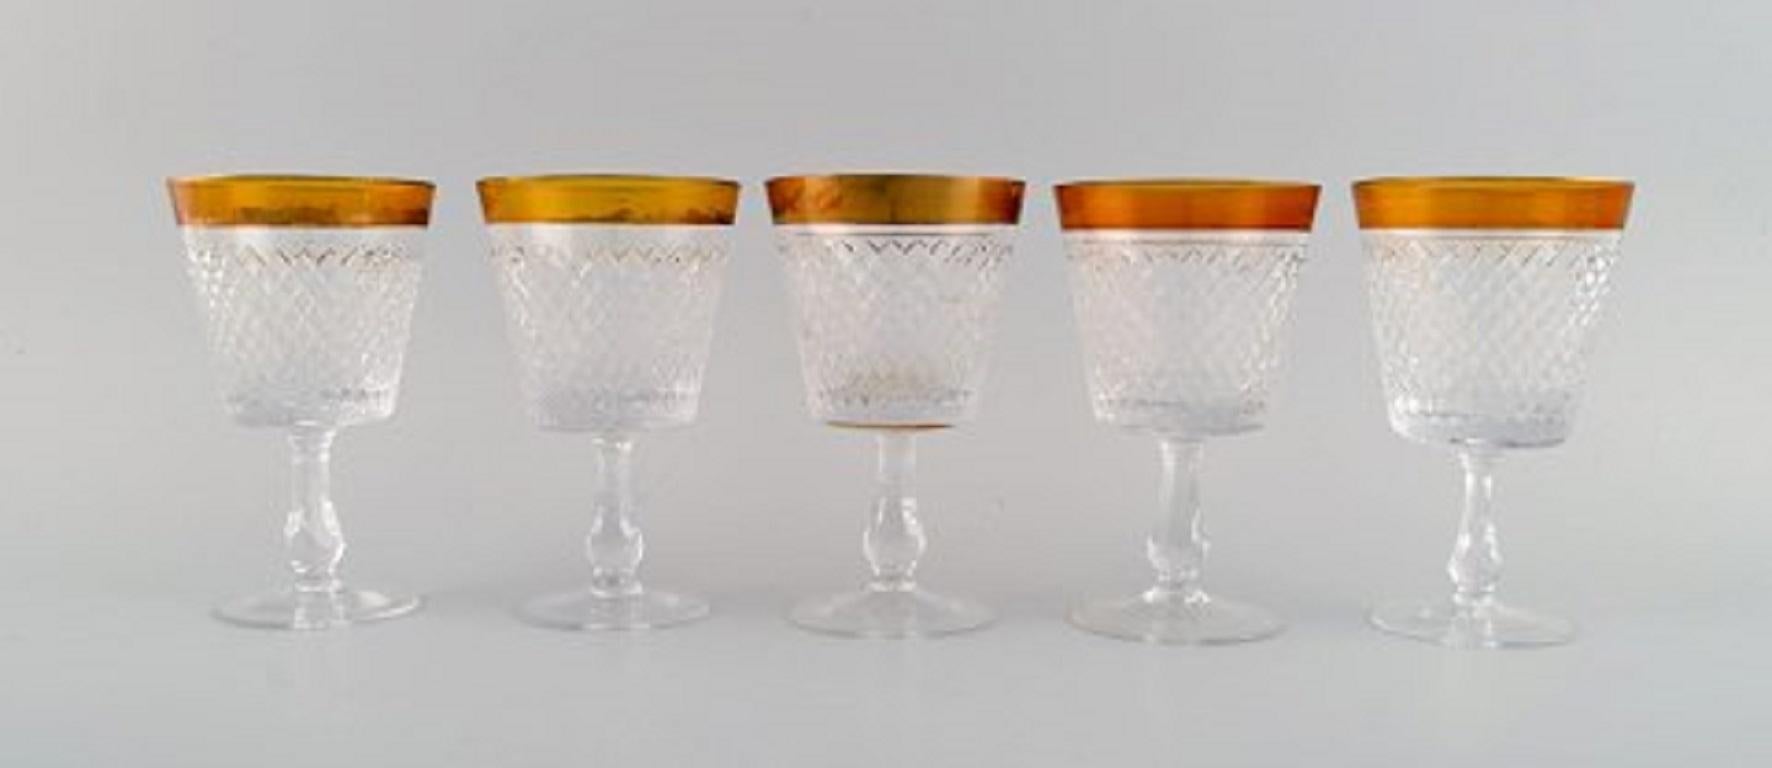 French 14 Glasses in Mouth-Blown Crystal Glass with Gold Edge, France, 1930s For Sale